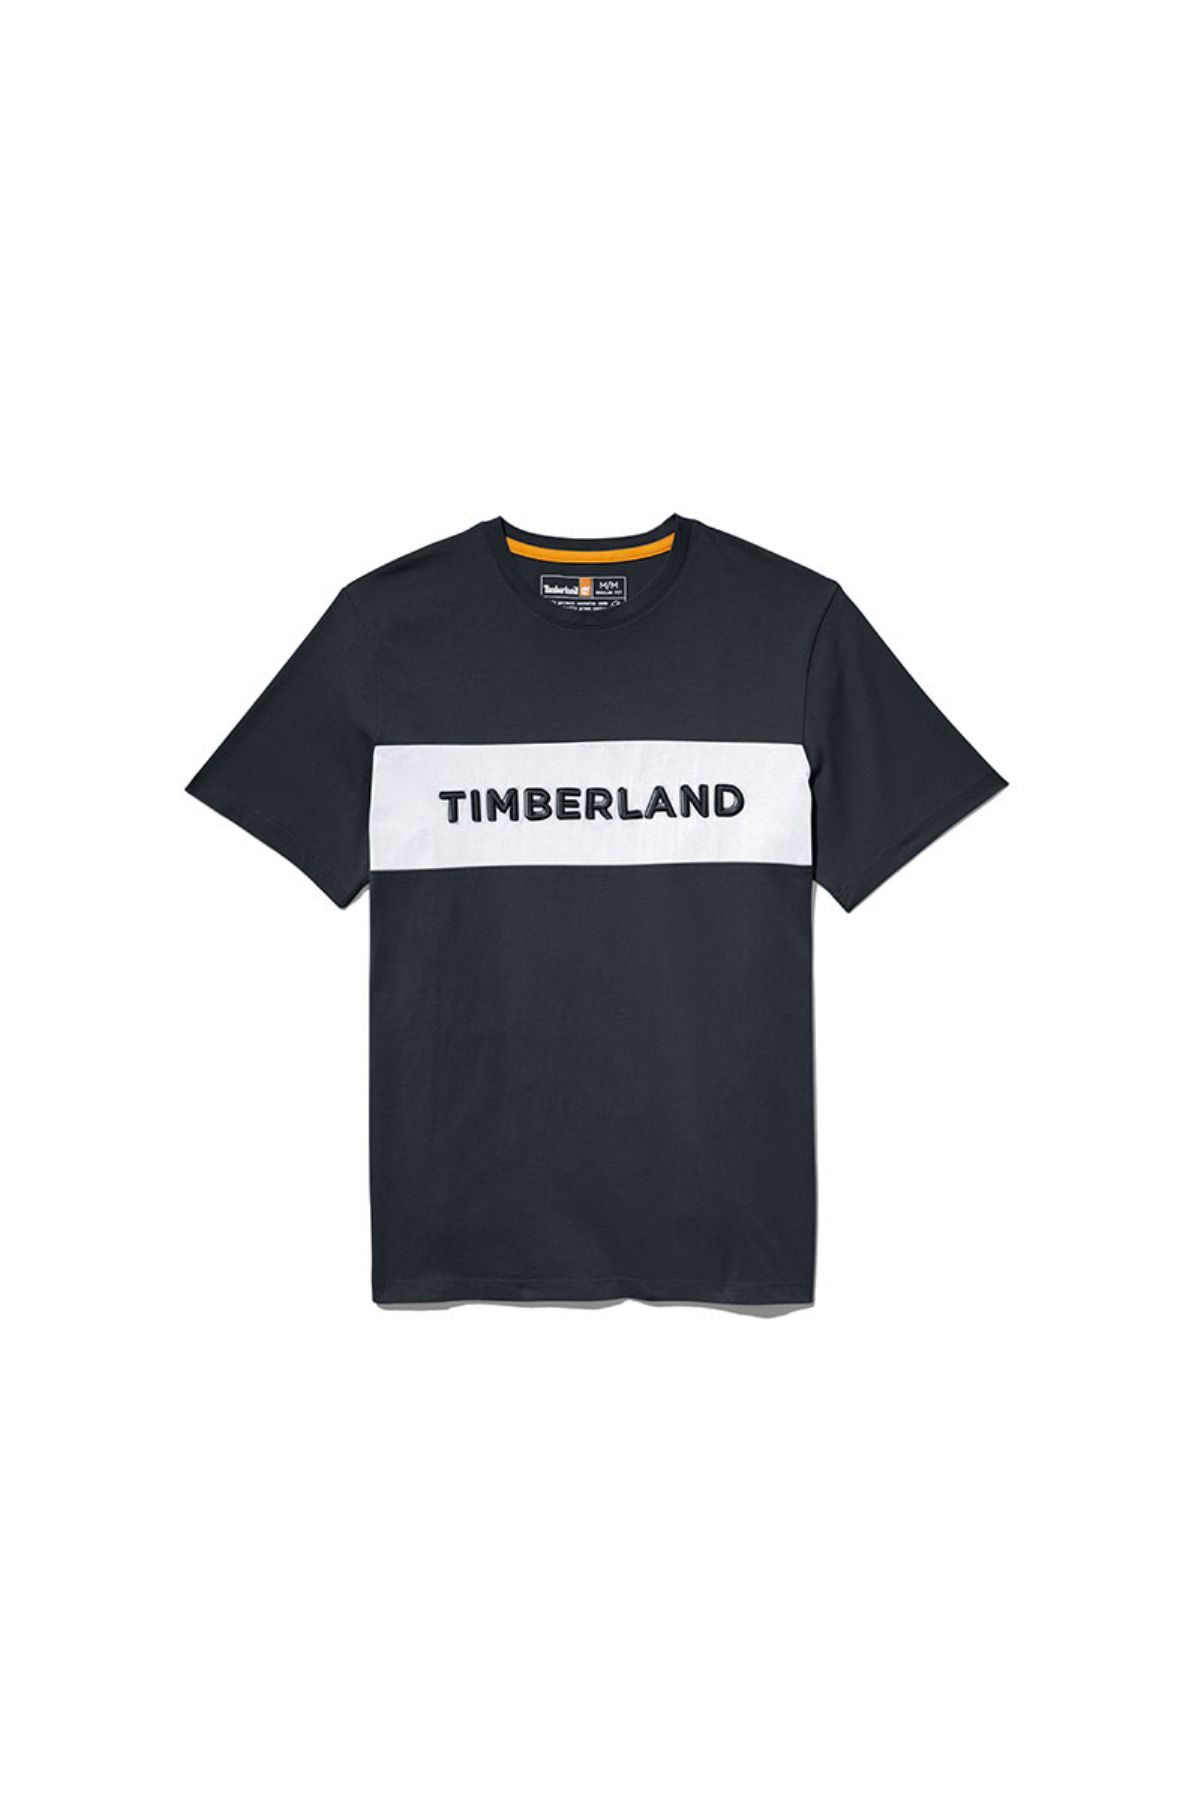 Timberland Ss Branded Linear Tee